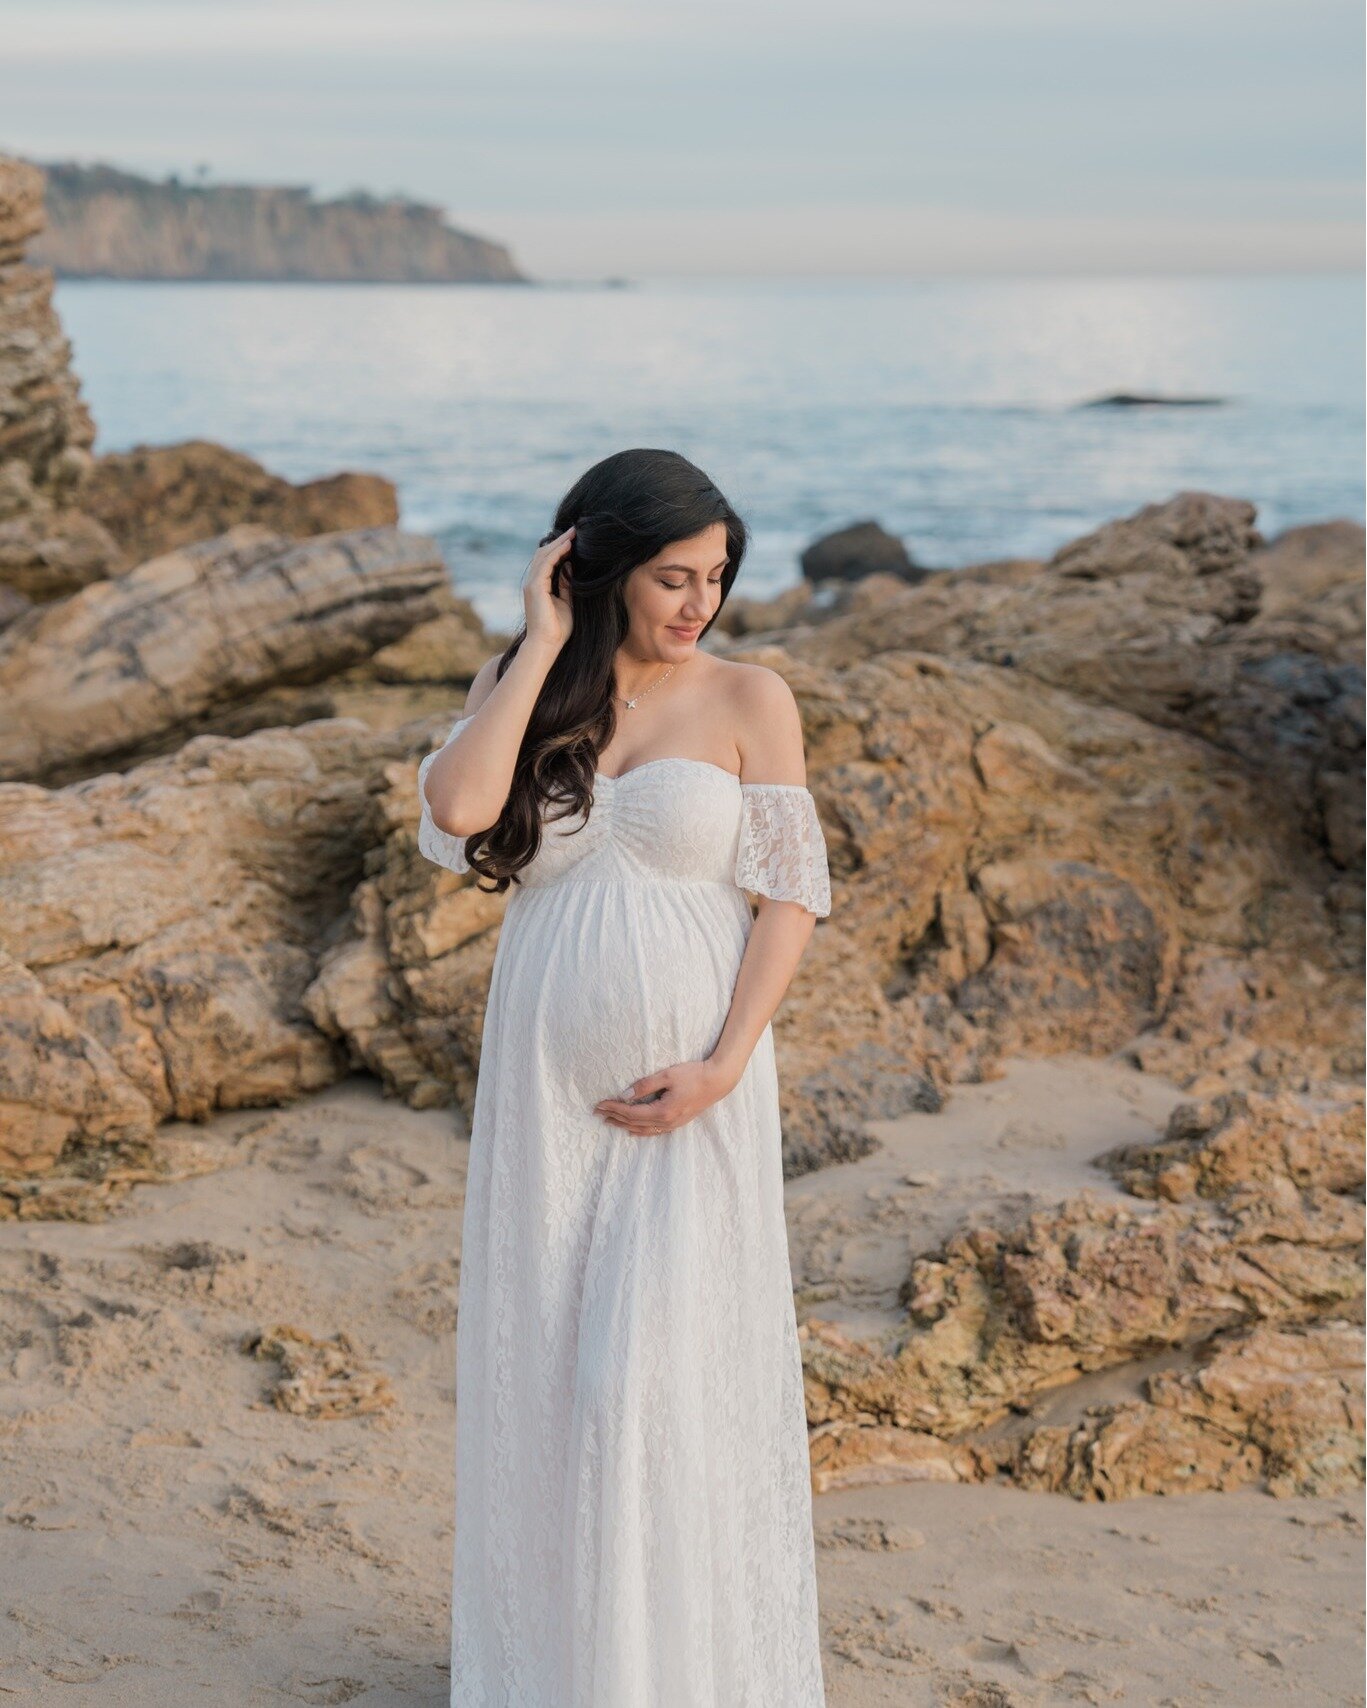 Never too early in the year for beach side Maternity.  We help you plan everything form tides to sunset times. Making sure the conditions are just right. We have a few favorite beaches in South Orange County : )